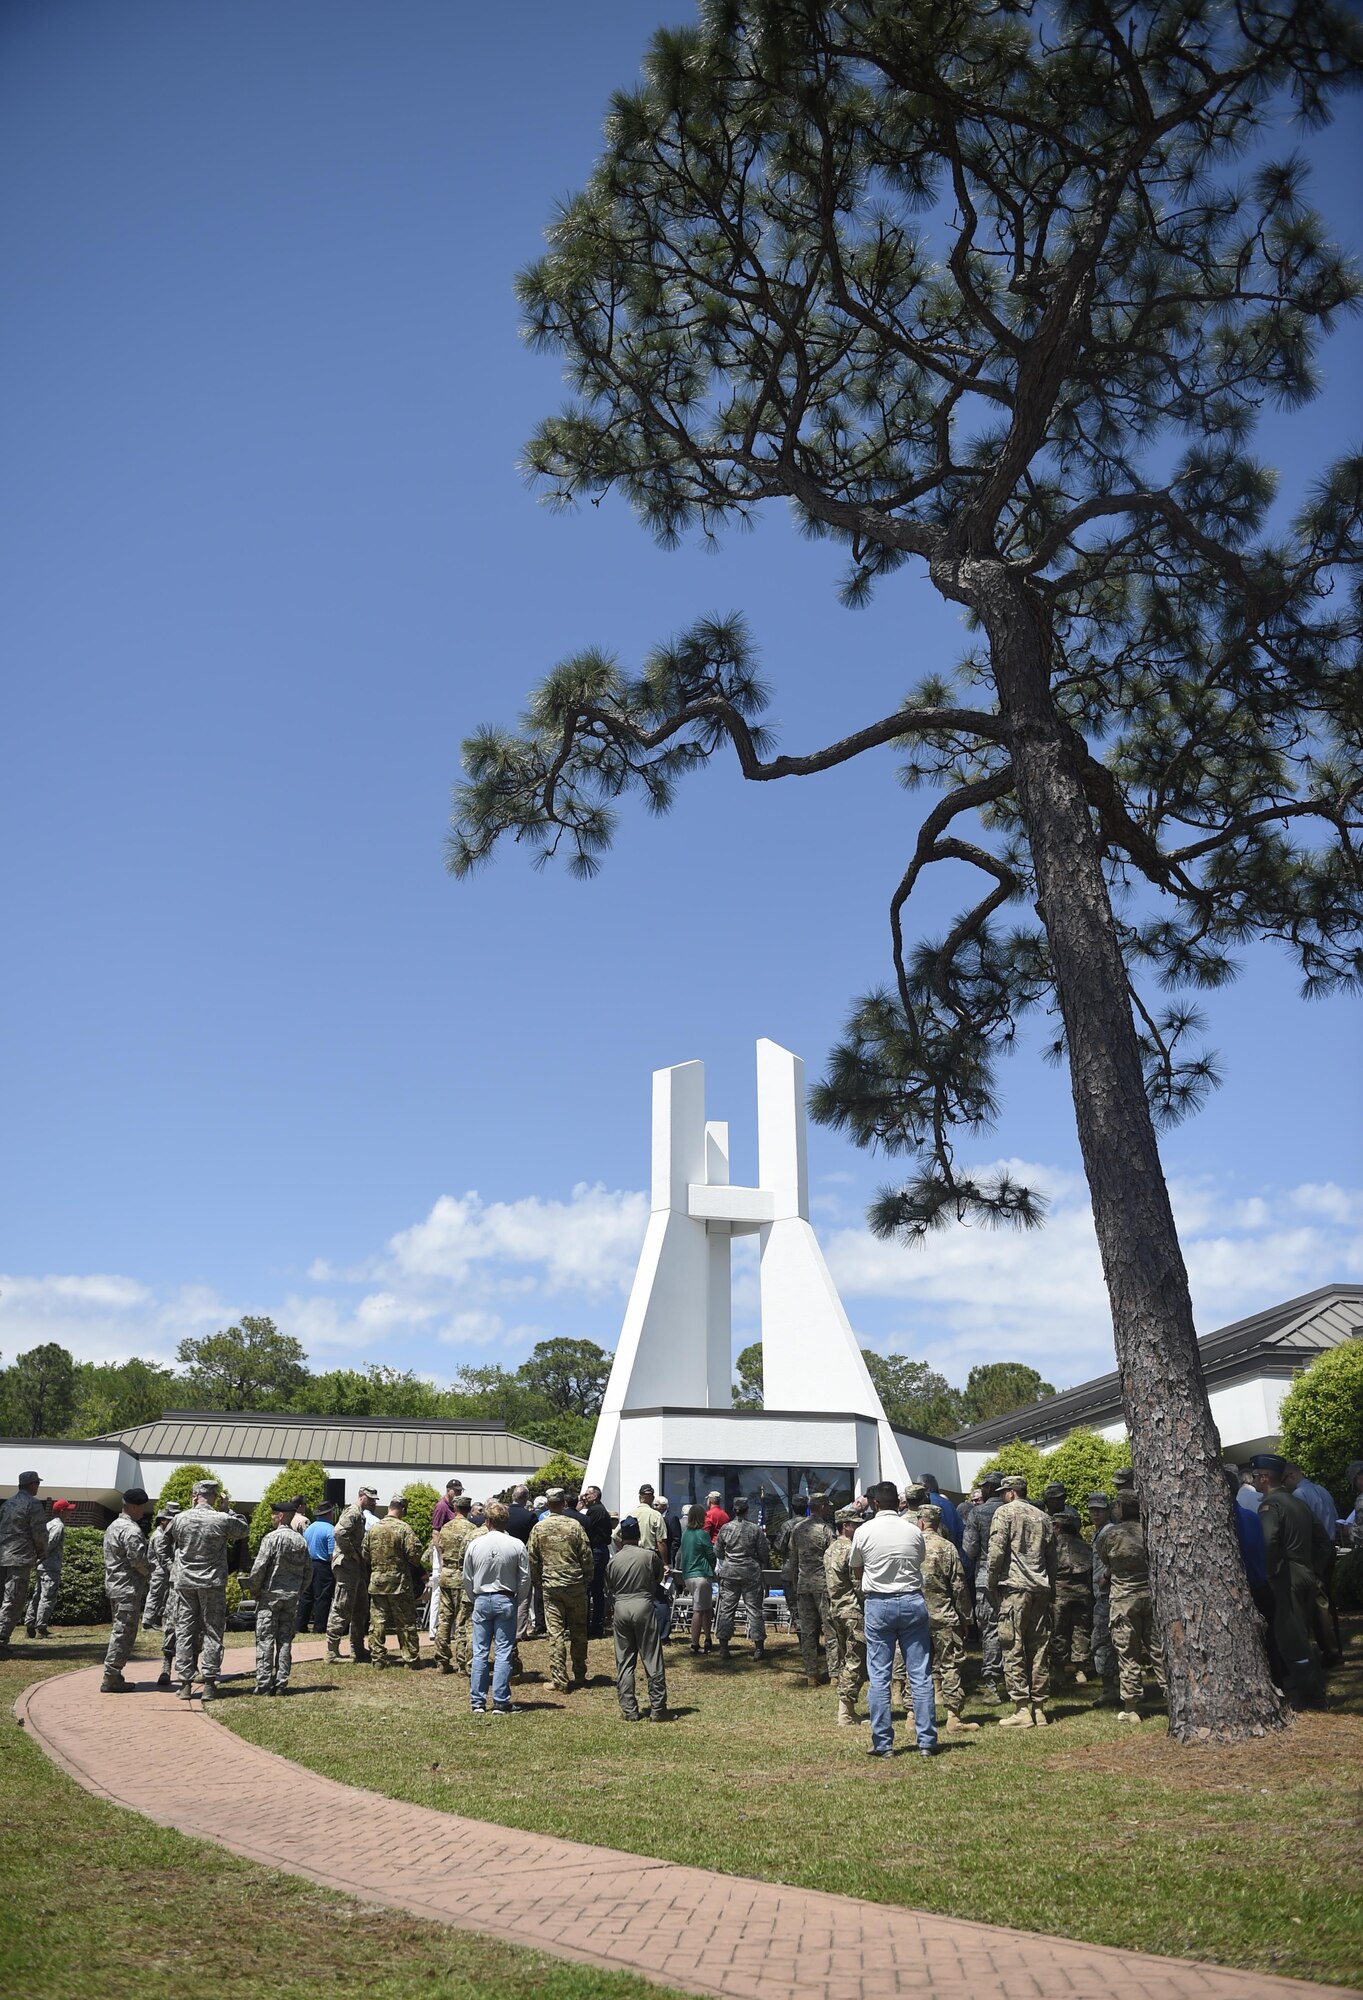 Airmen and families gather to remember Operation Eagle Claw on its 36th anniversary at Hurlburt Field, Fla., April 25, 2016. The attempted joint-services mission was conducted April 24, 1980, to rescue Americans being held hostage by a mob in Tehran, Iran, since Nov. 4, 1979. The failure of the services to work cohesively lead to the establishment of United States Special Operations Command on April 16, 1987. (U.S. Air Force photo Airman 1st Class Kai White)